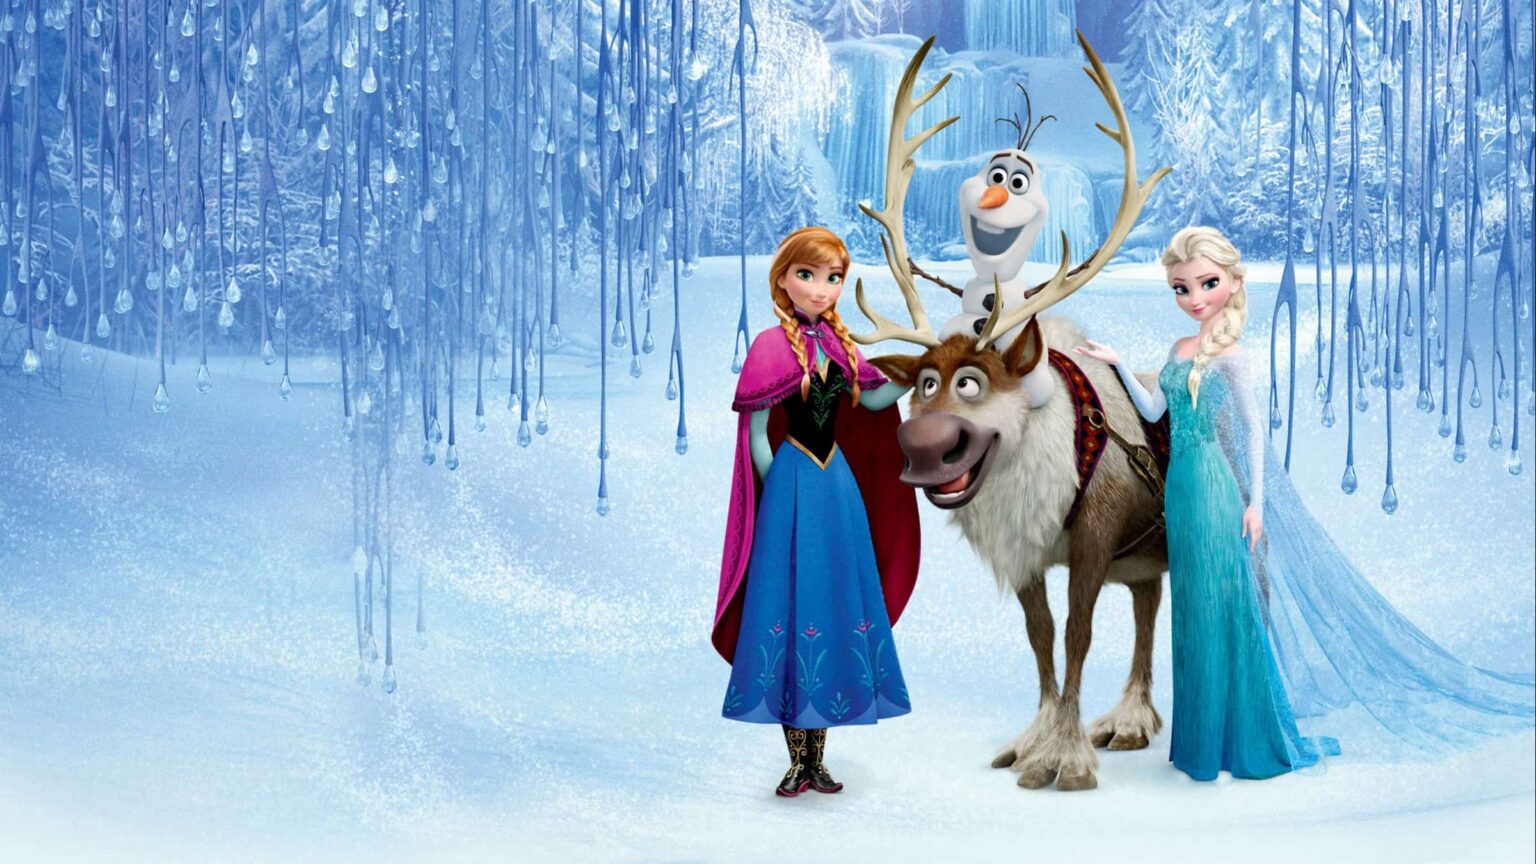 Have you seen 'Frozen' more times than you care to count? Can you belt out "Let It Go" from memory? Prove it by acing our quiz about the song lyrics.